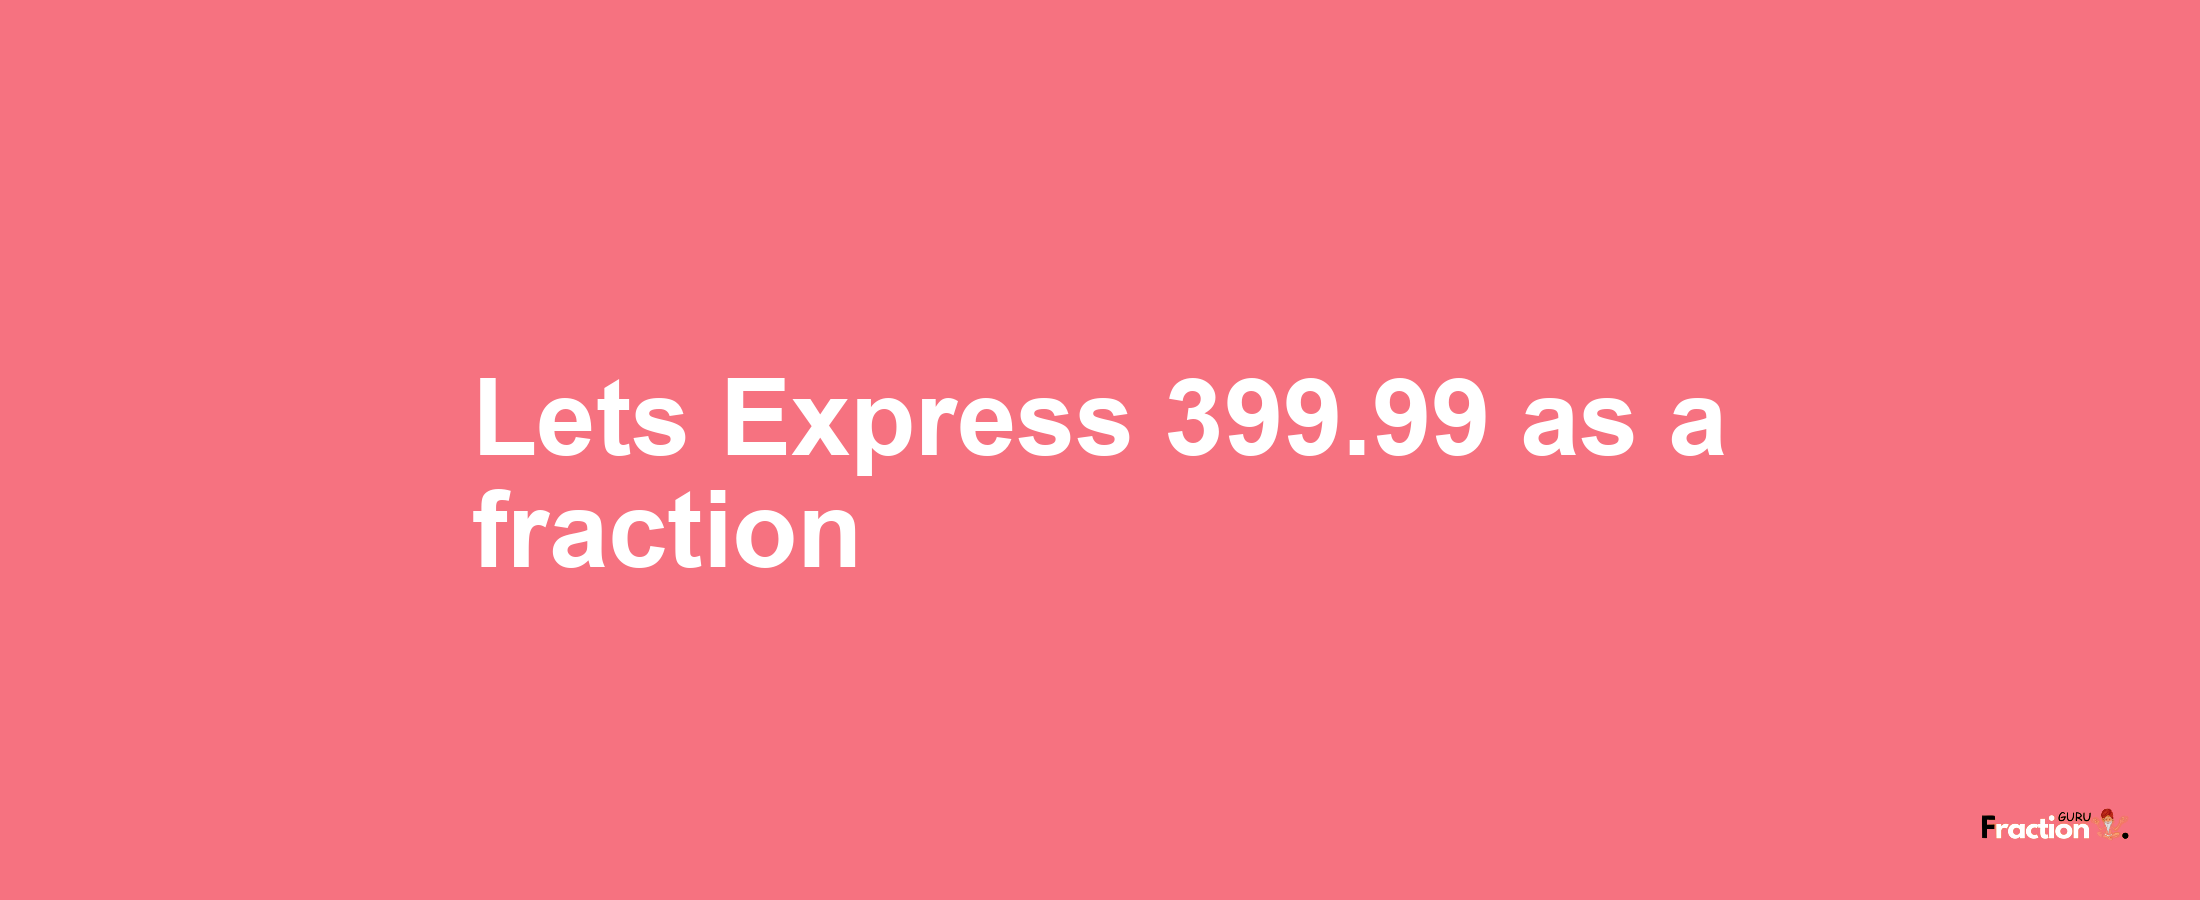 Lets Express 399.99 as afraction